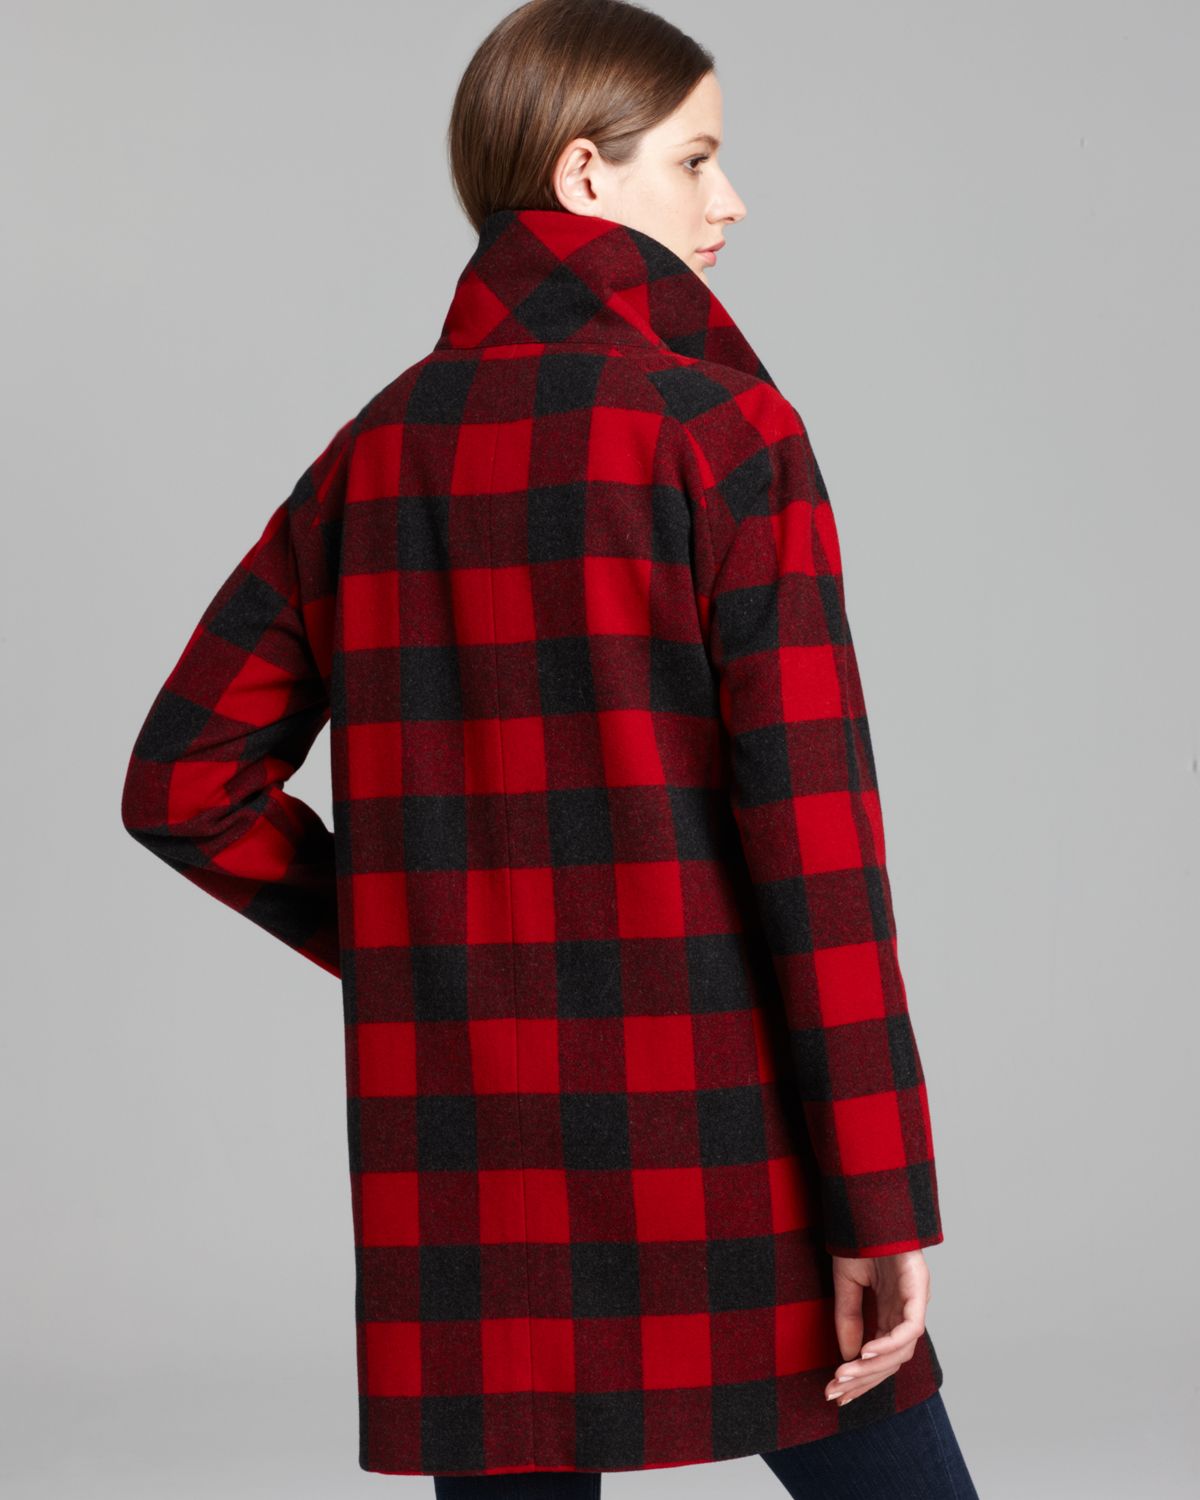 Lyst - Woolrich Coat Greenland Plaid Heritage in Red